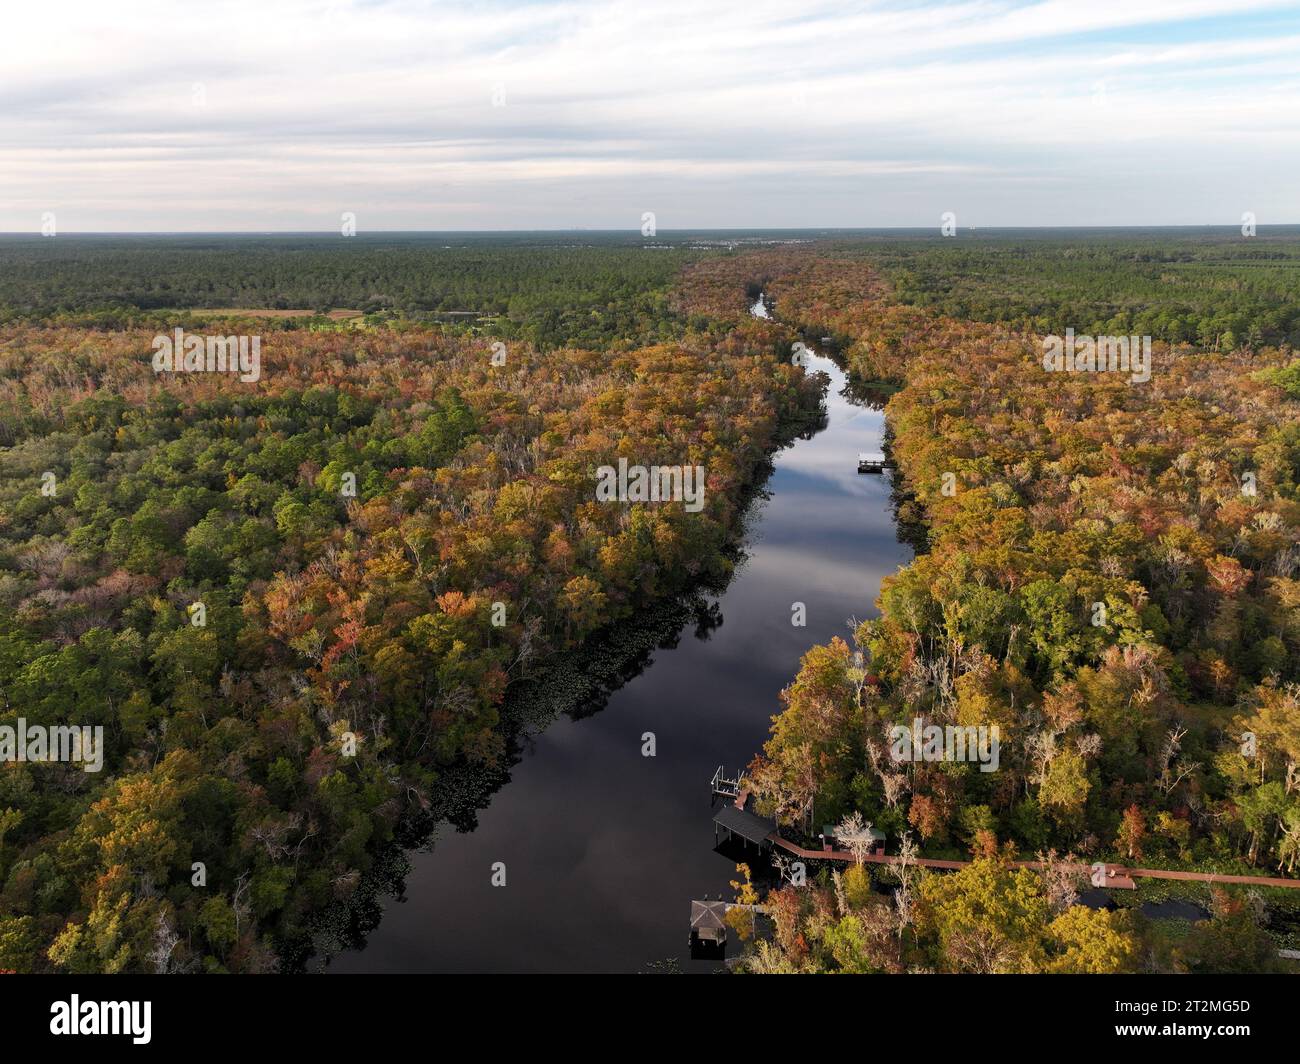 An aerial view of Trout Creek in St. Johns County, Florida Stock Photo